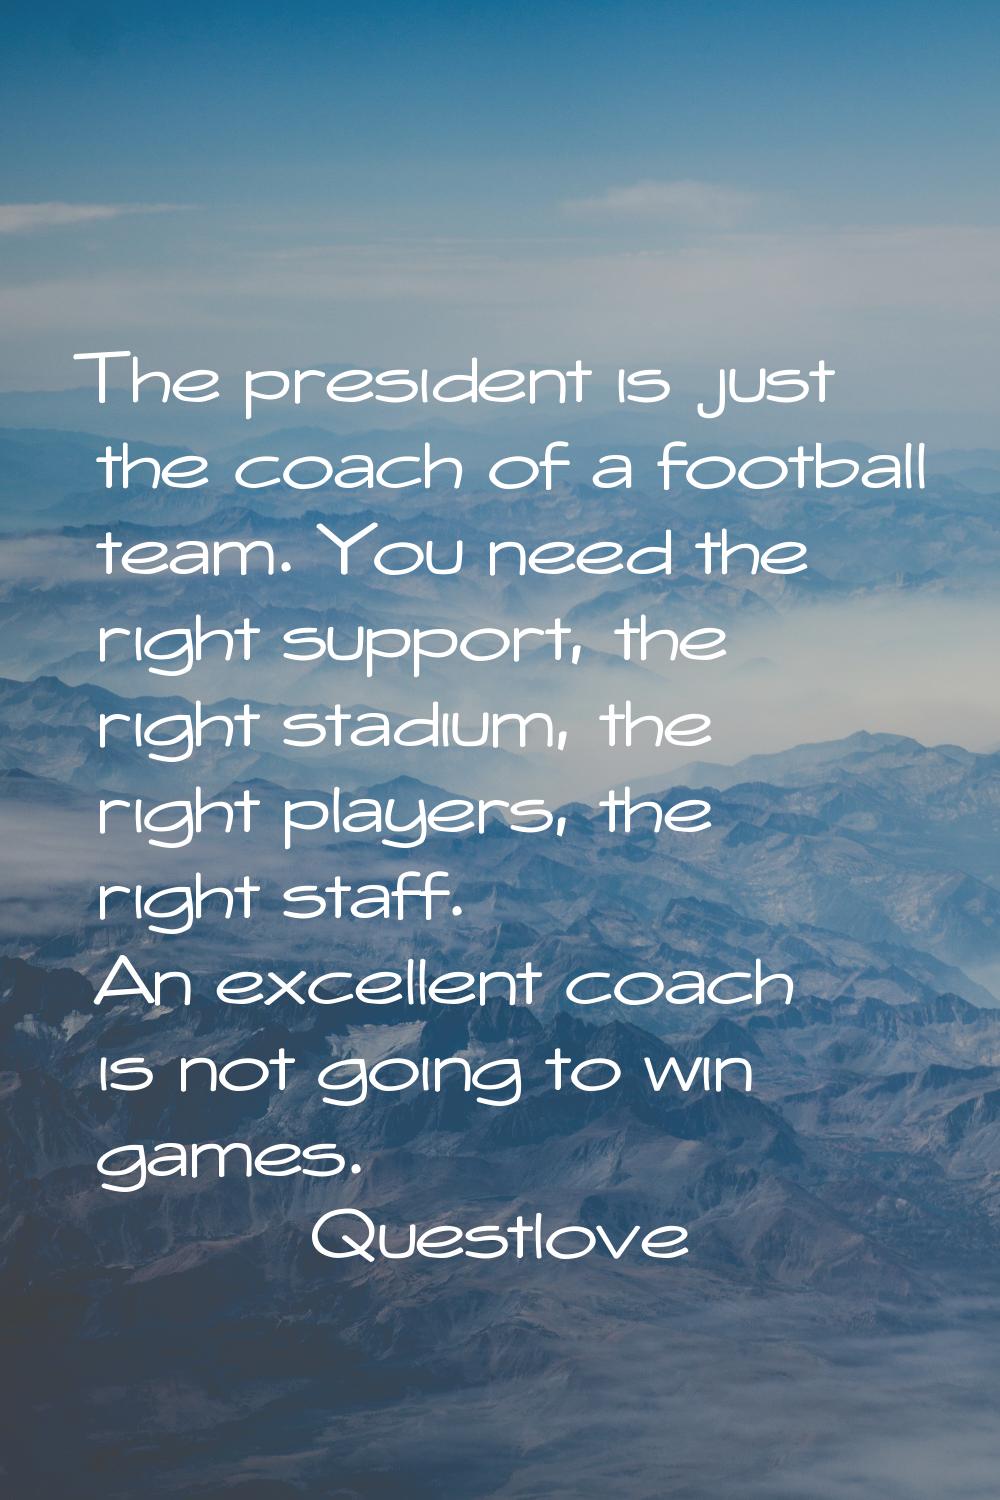 The president is just the coach of a football team. You need the right support, the right stadium, 